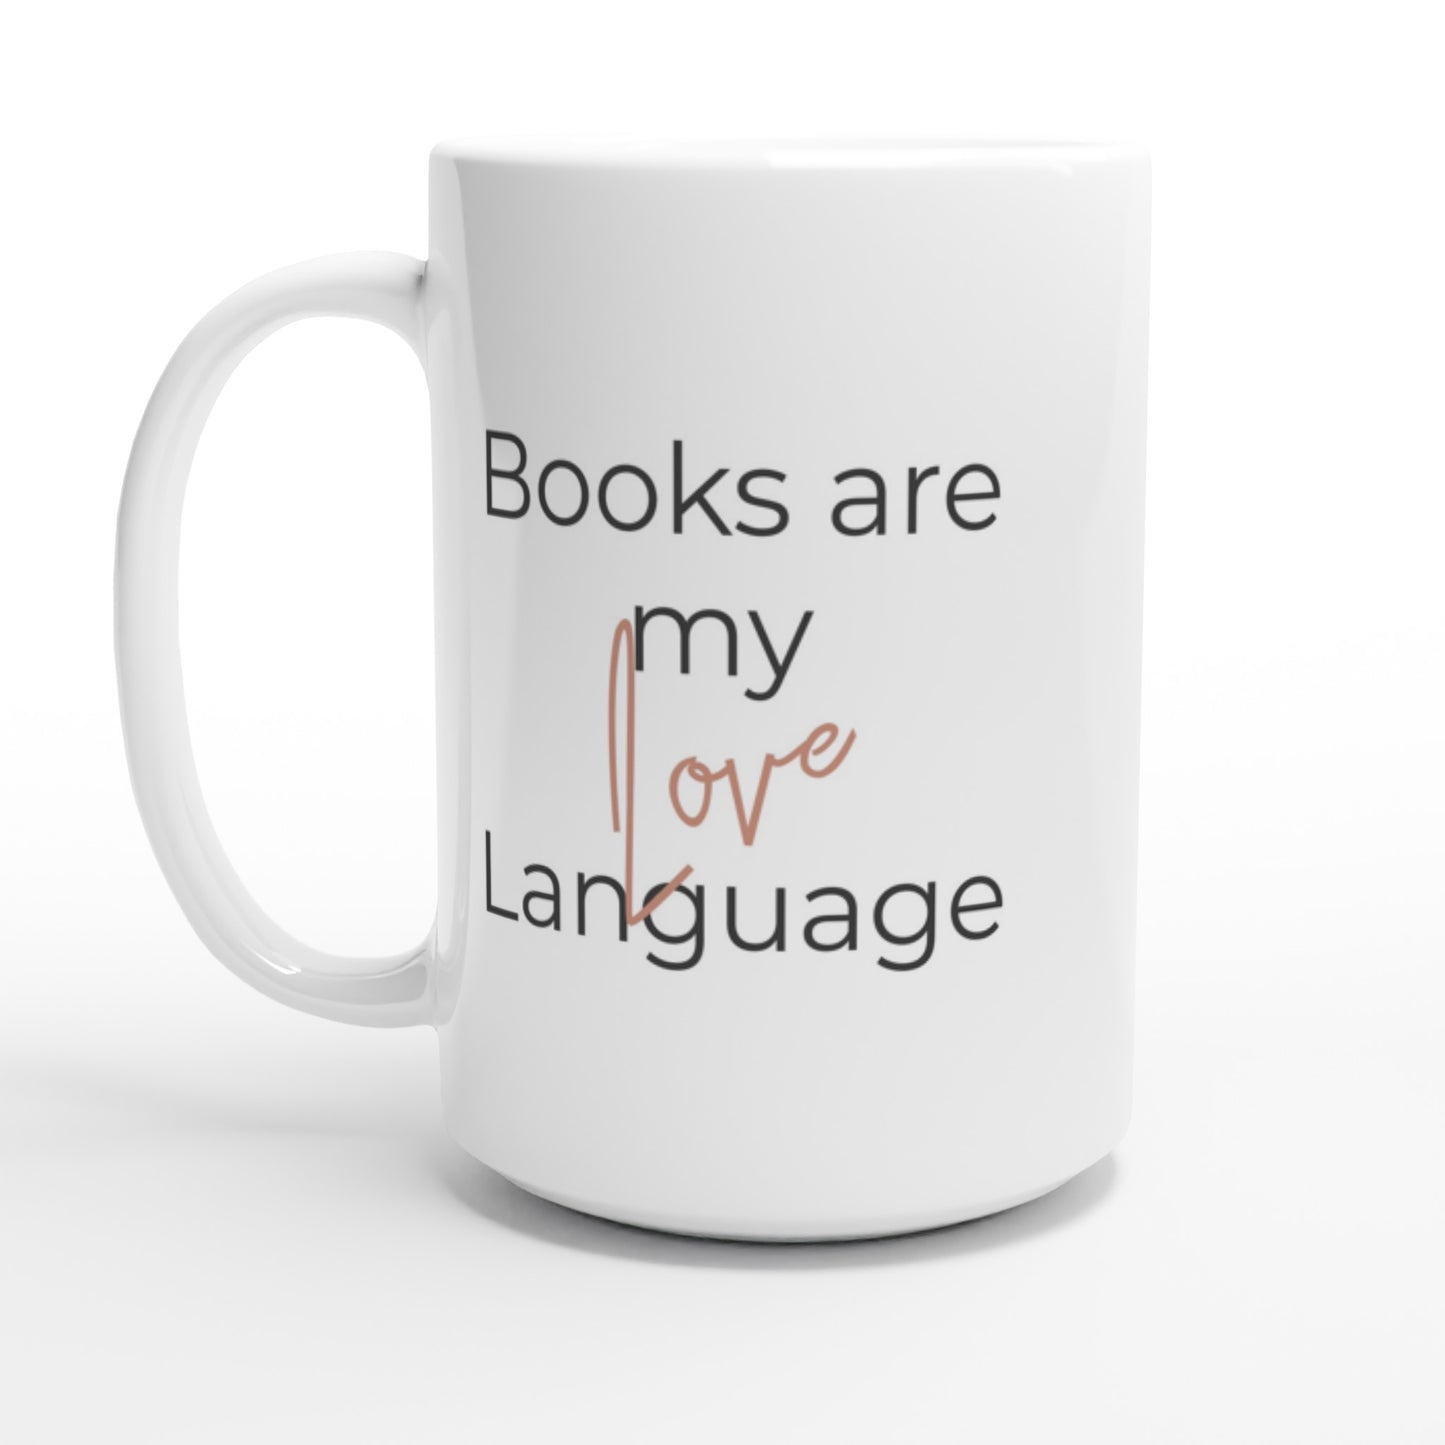 The ultimate "Books are my Love Language // Book-Related Coffee Mug" for book lovers, serving as both a reading companion and a stylish accessory.